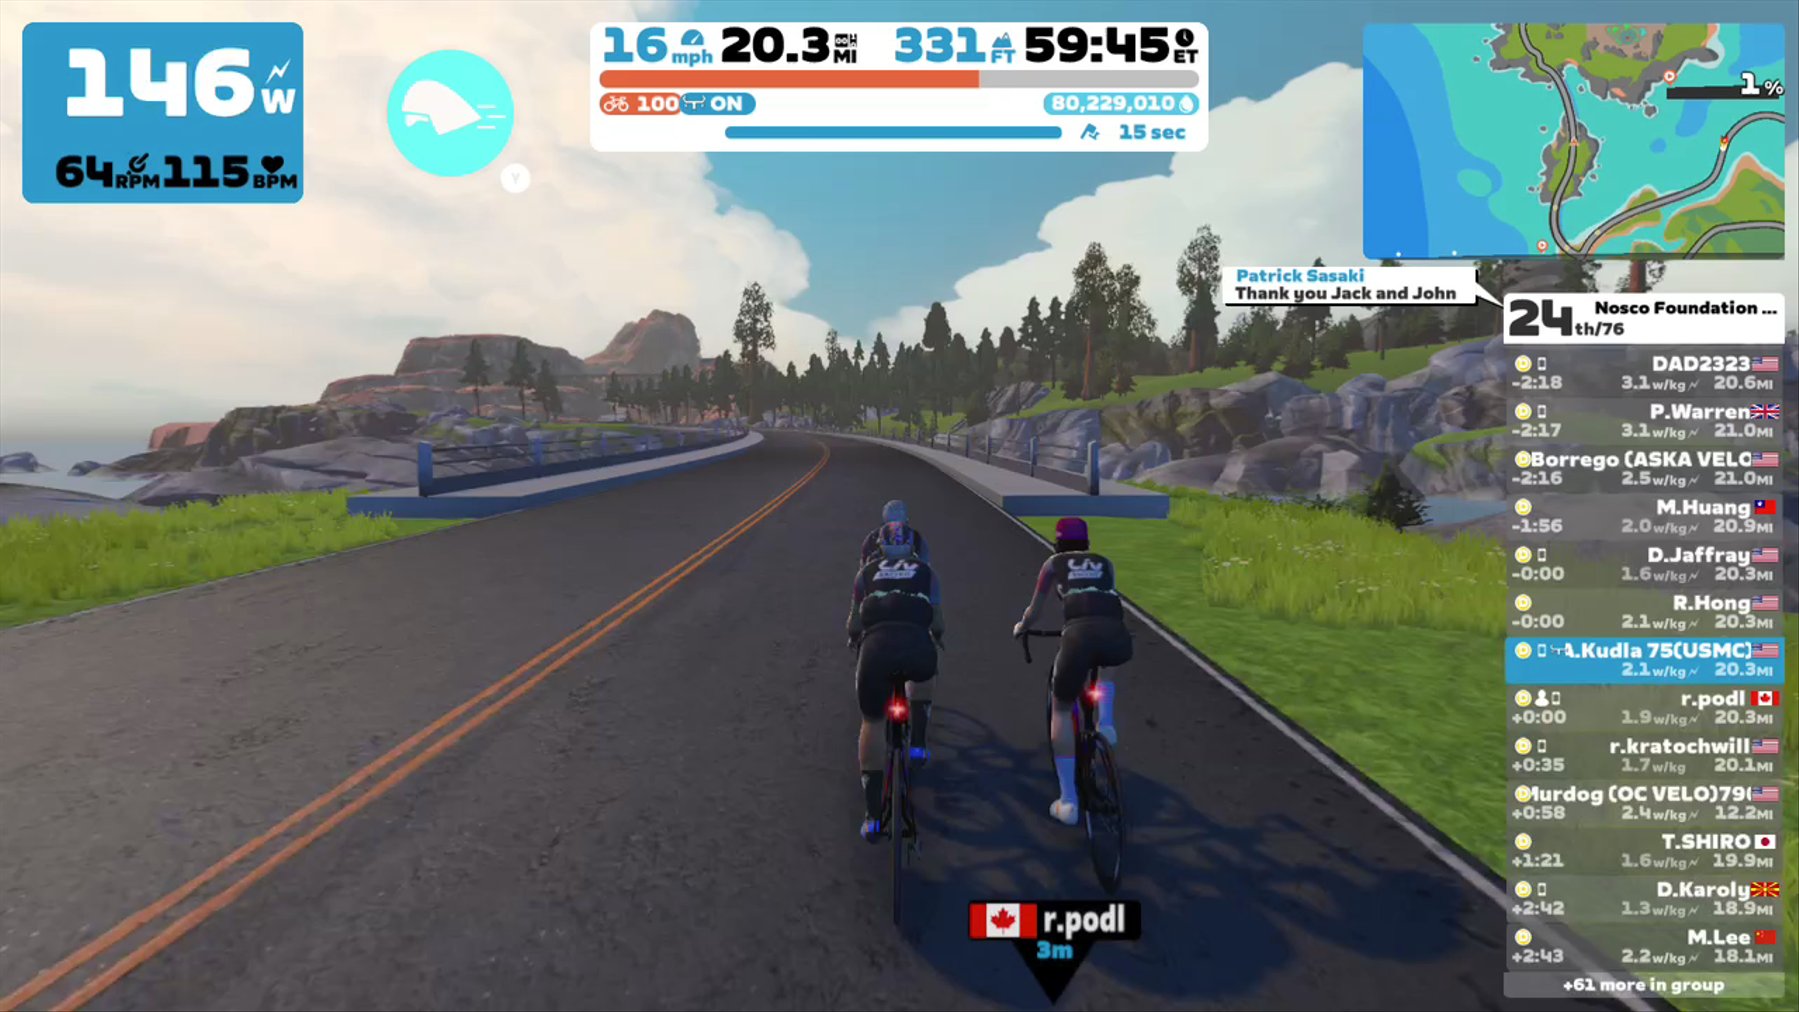 Zwift - Group Ride: Nosco Foundation Social Ride p/b Liv Cycling (D) on Tick Tock in Watopia